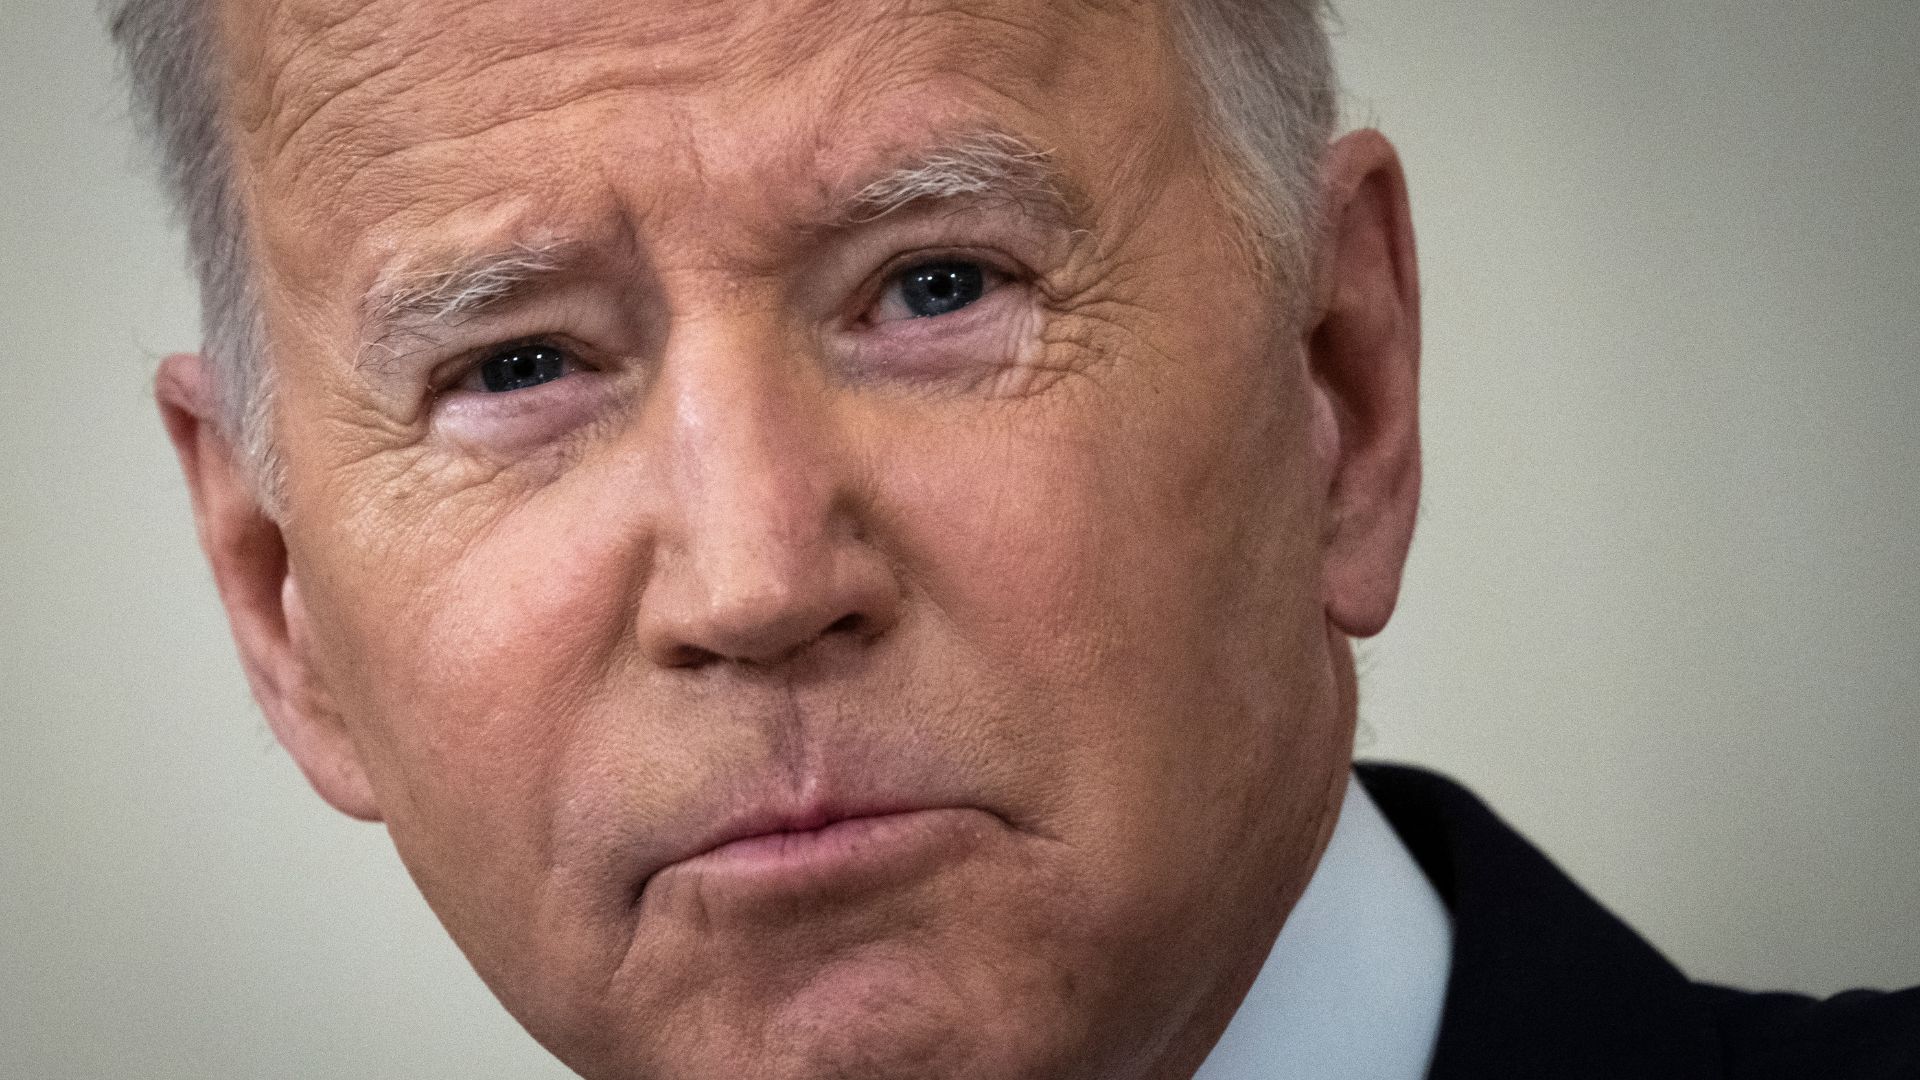 Friday Afternoon Update: Biden’s Approval Near Record-Low, Tainted Eye Drops Threaten Americans, Ford Set To Lose Billions Due To Electric Vehicle Department